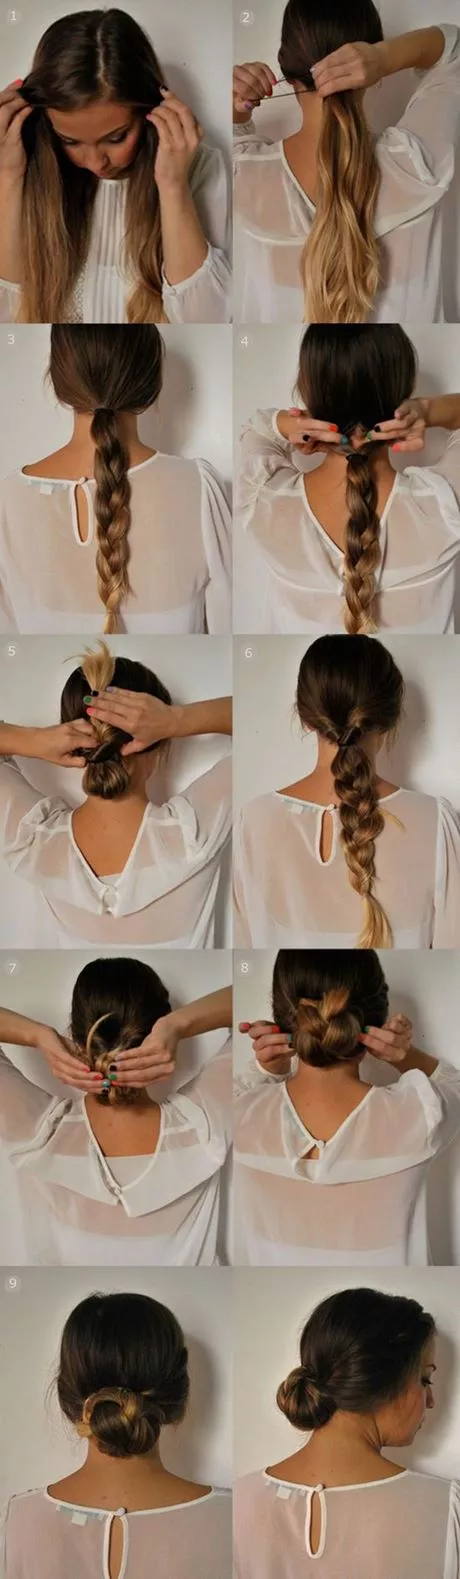 Nice and simple hairstyles nice-and-simple-hairstyles-77_12-3-3